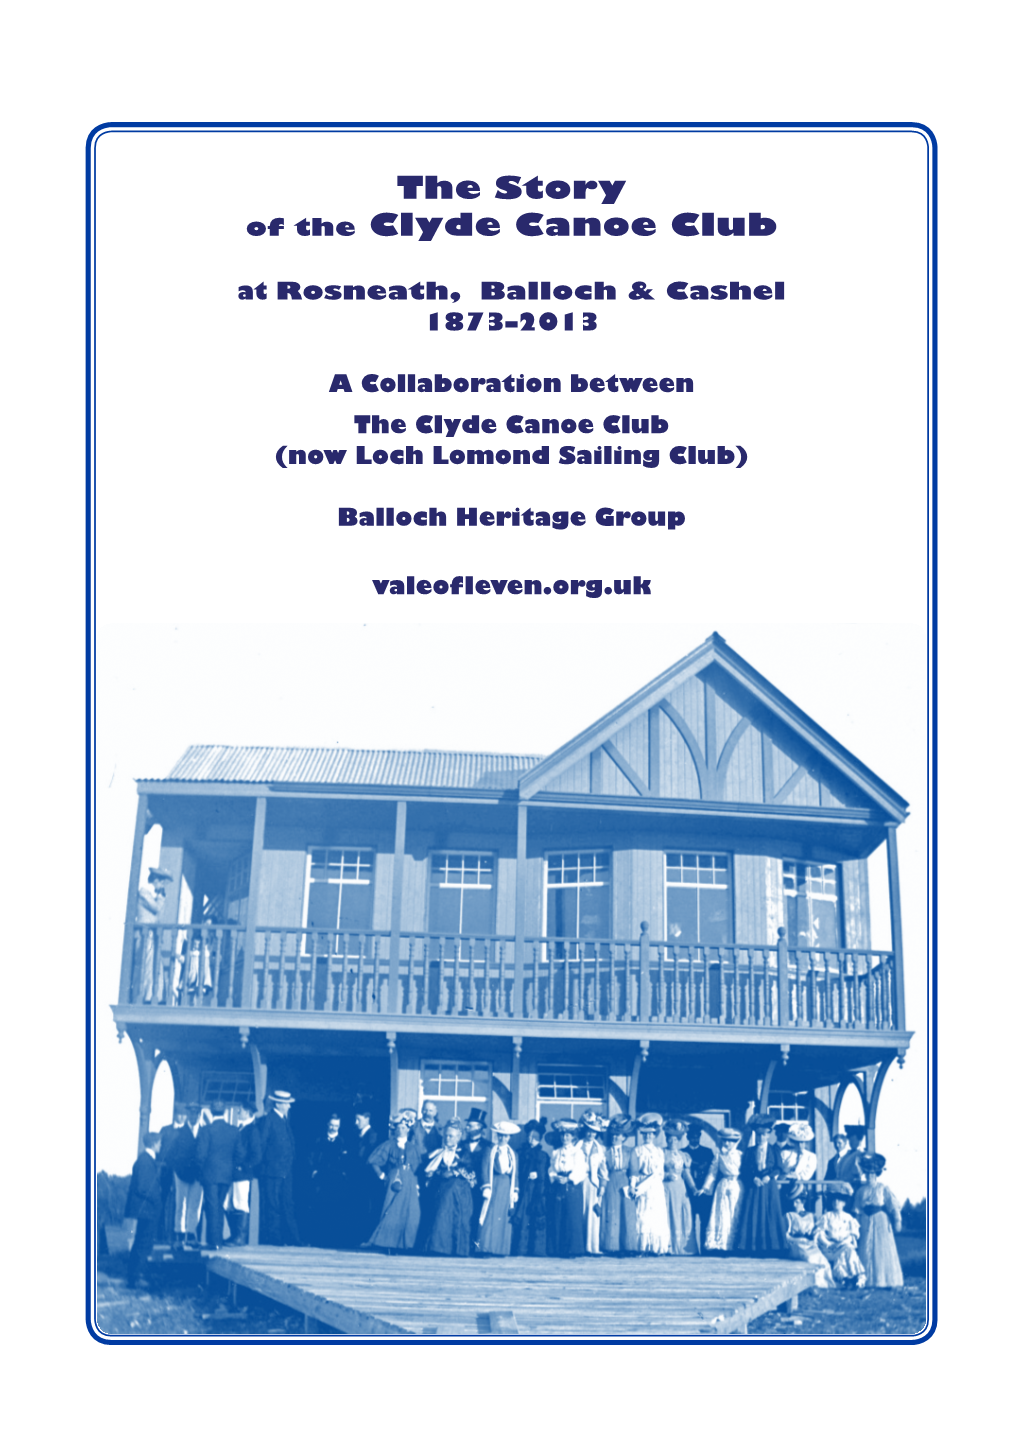 The Story of the Clyde Canoe Club at Rosneath, Balloch & Cashel 1873–2013